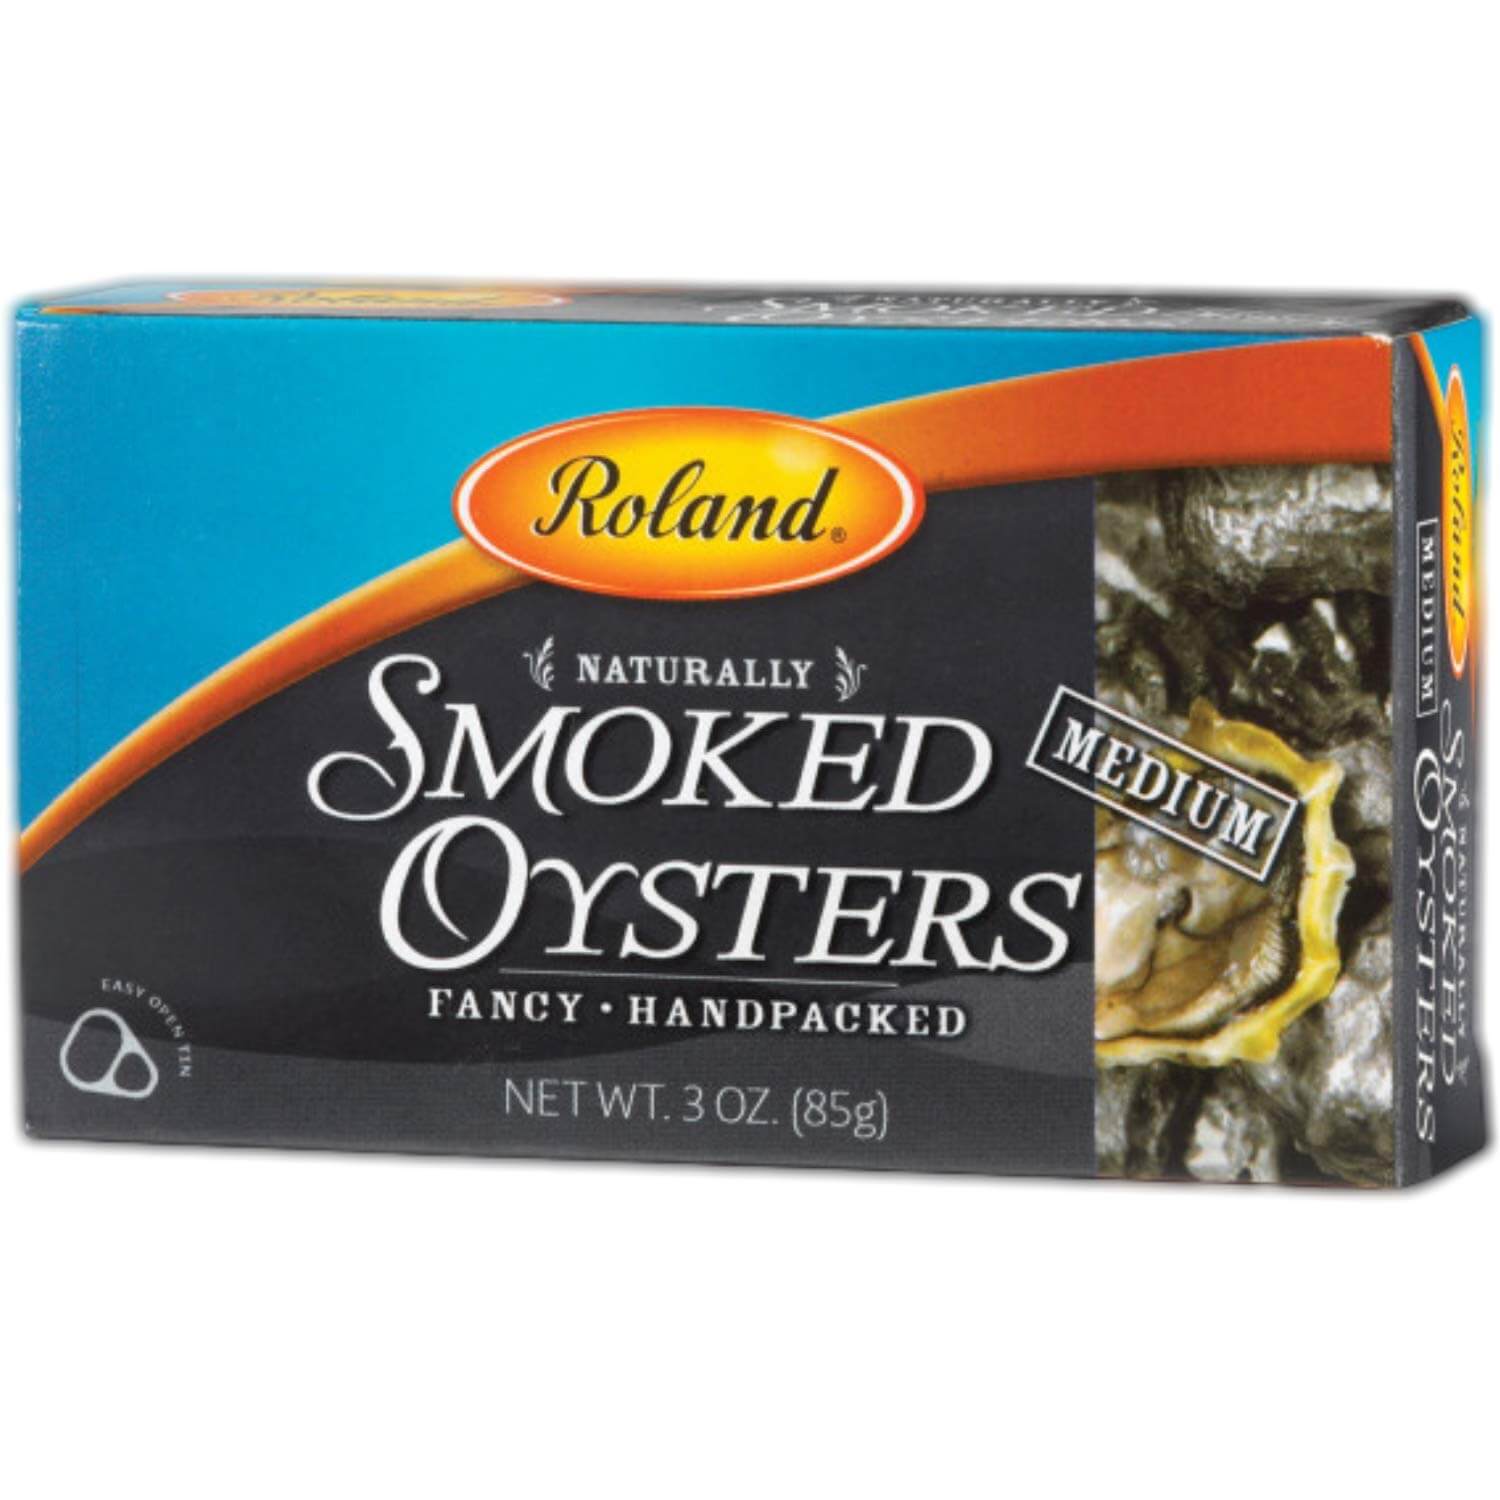 Roland Foods Premium Naturally Smoked Medium Oysters in Oil